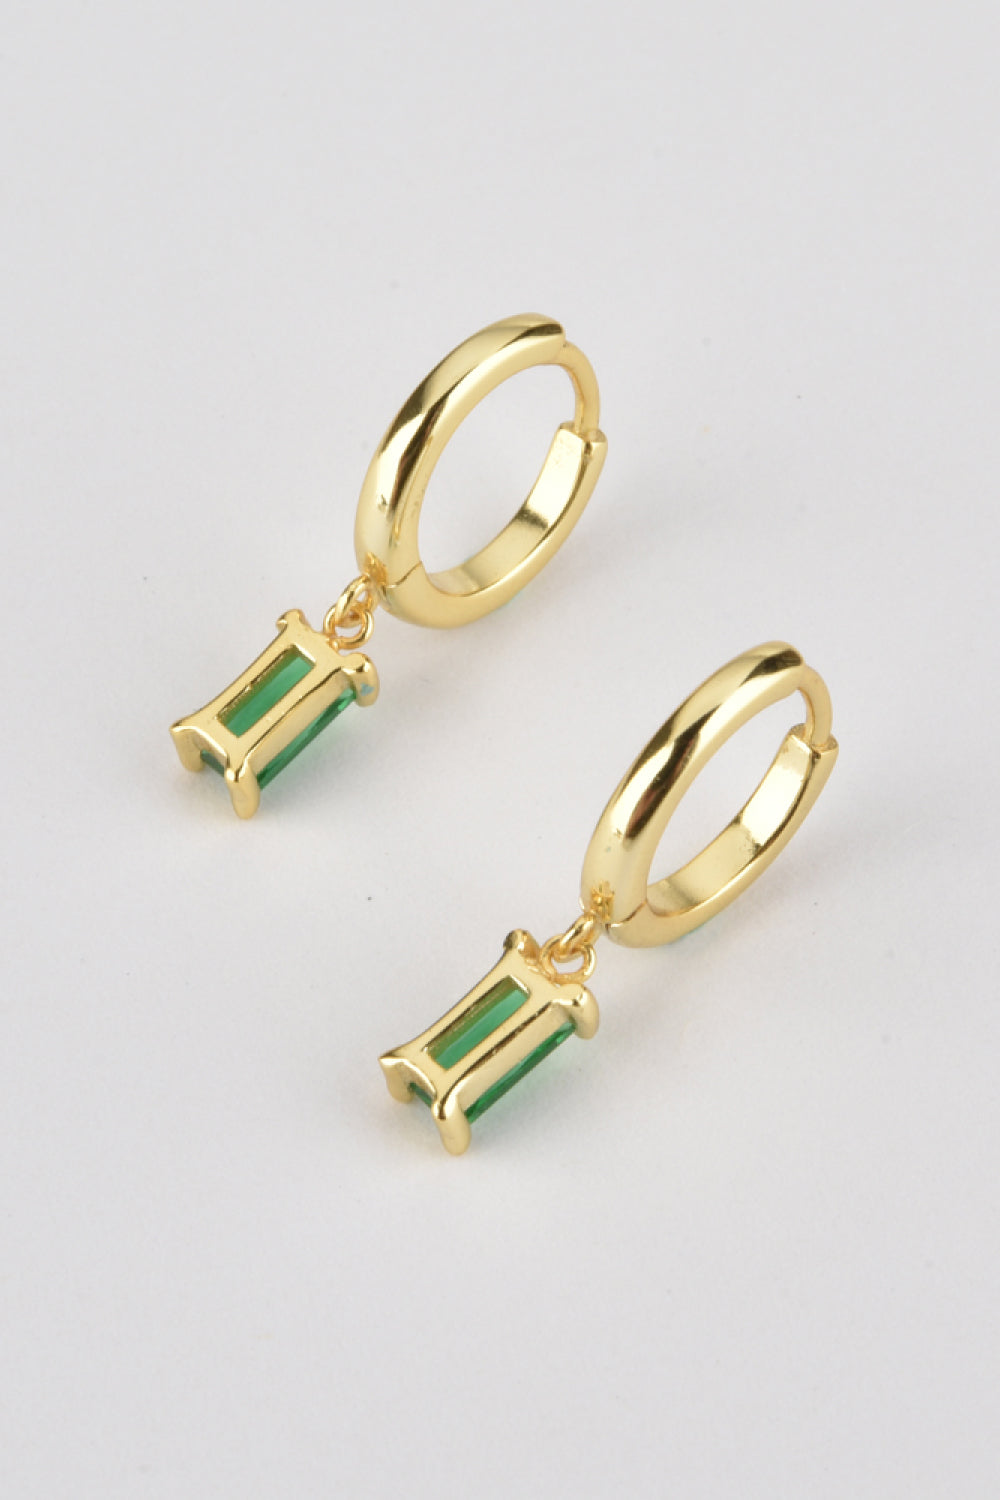 Explore our collection of trendy huggie earrings. Designed for both style and comfort, these earrings are perfect for any occasion. Shop now!